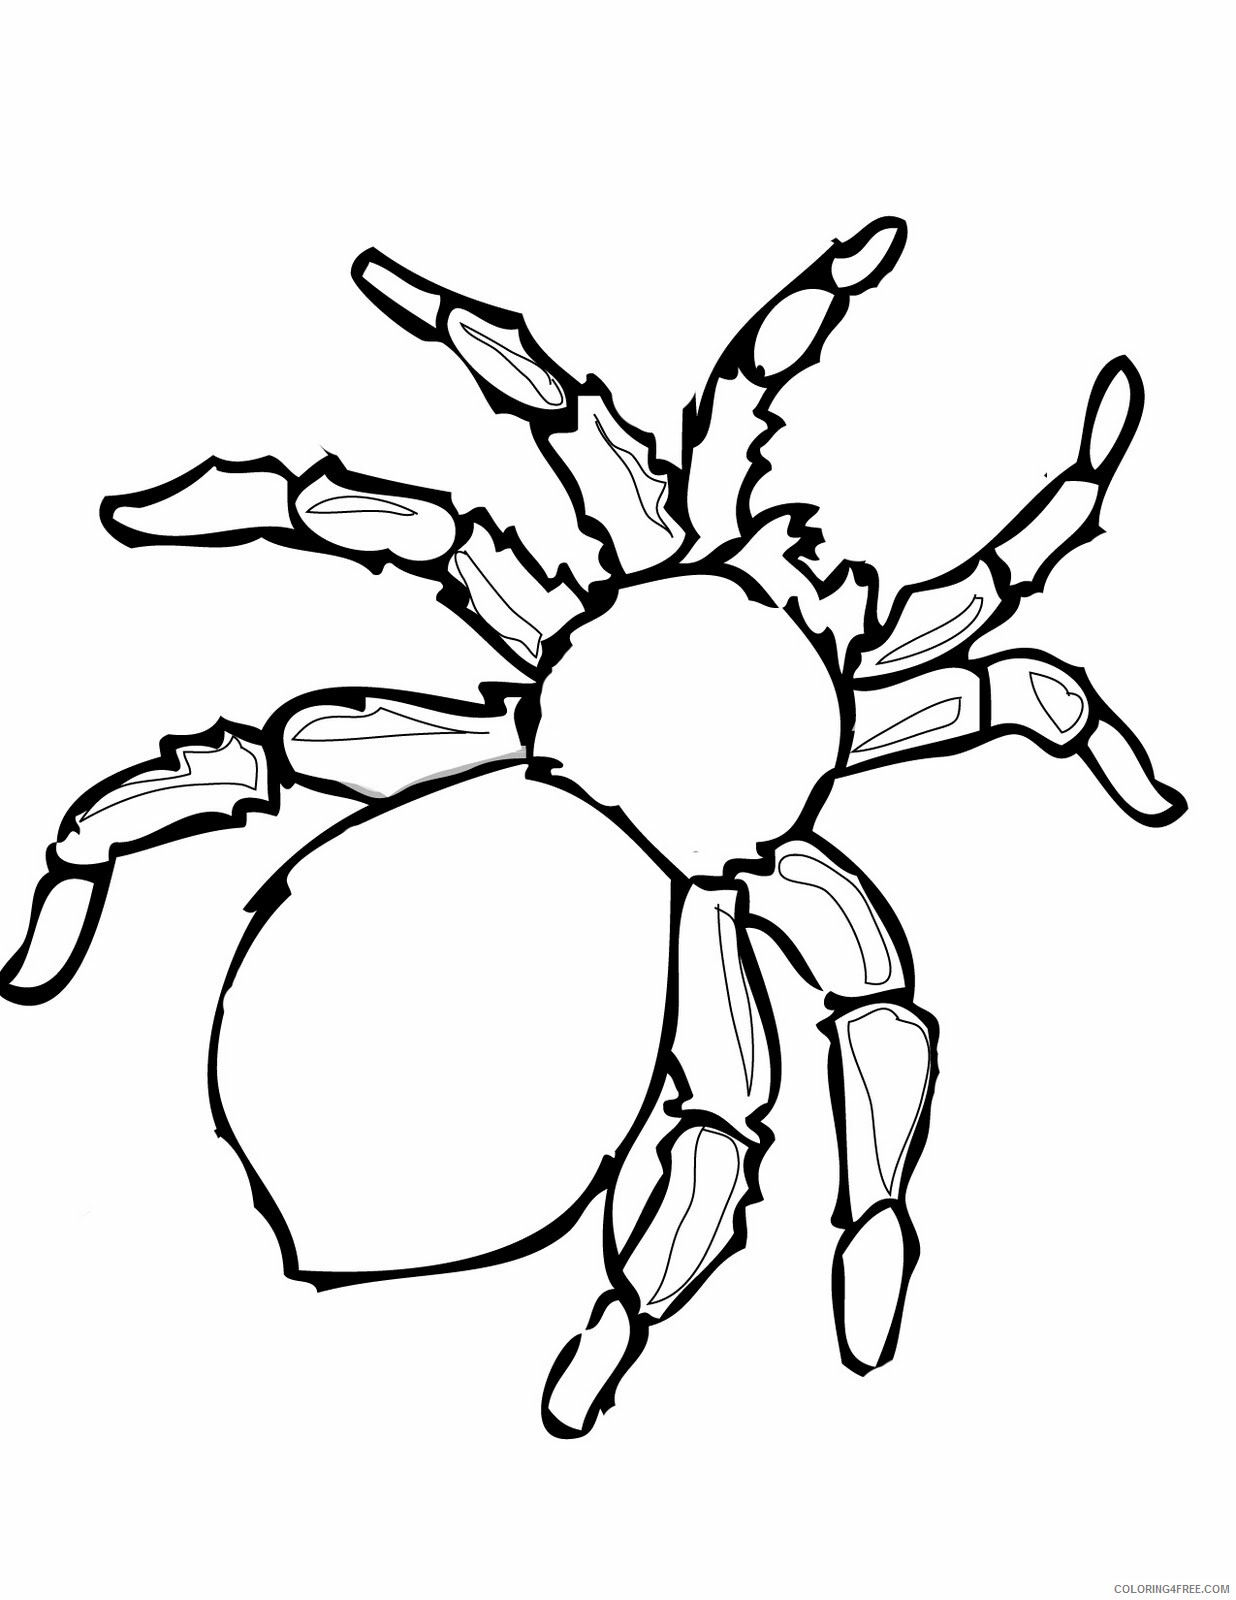 Spider Coloring Pages Animal Printable Sheets Printable Spider 2021 4627 Coloring4free